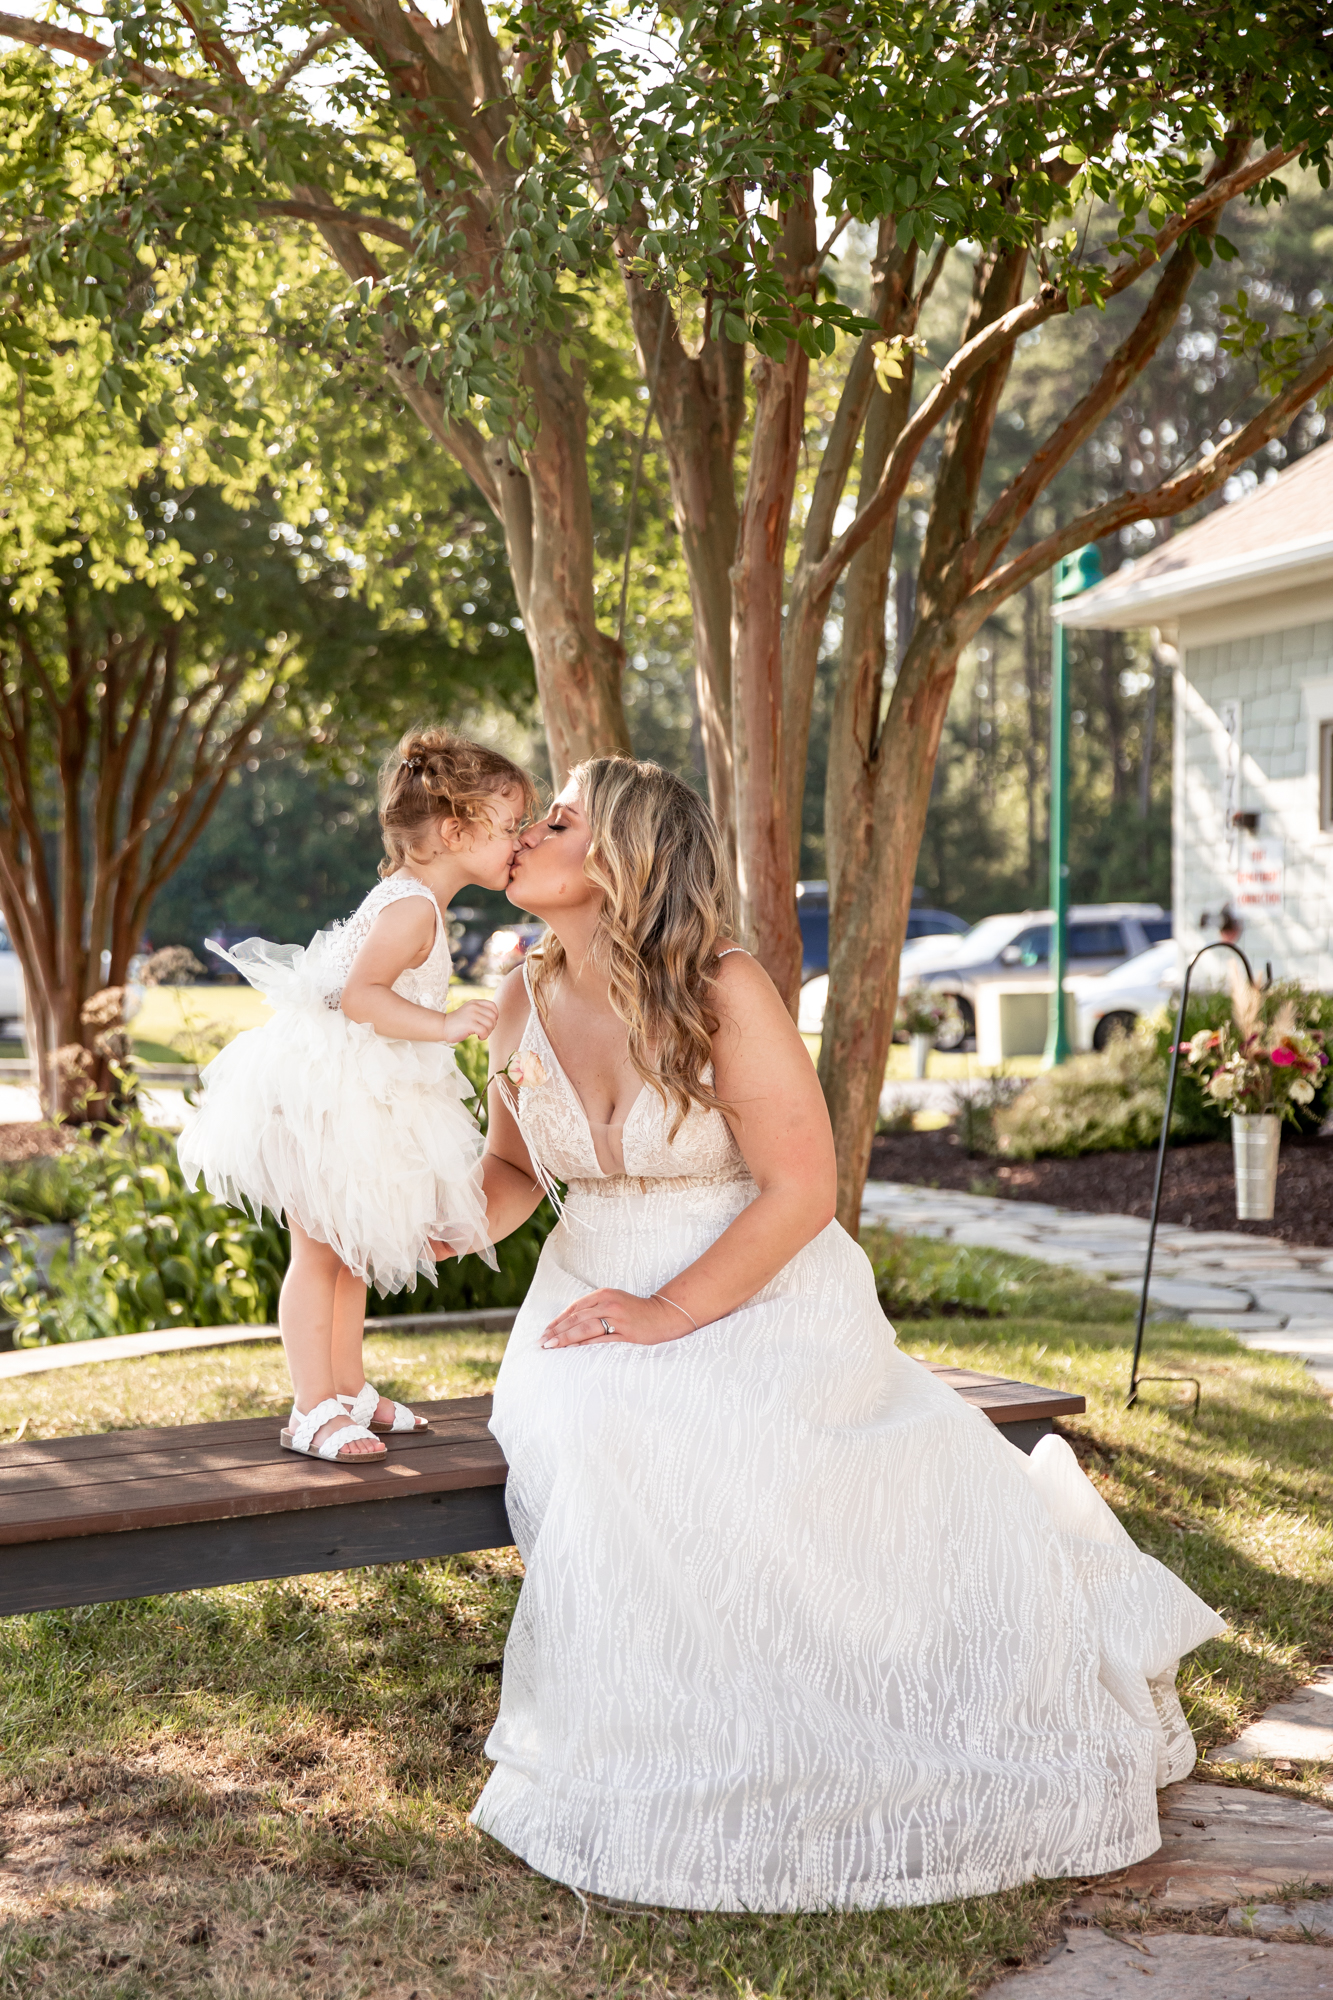 mother-daughter moment at a rehoboth beach wedding